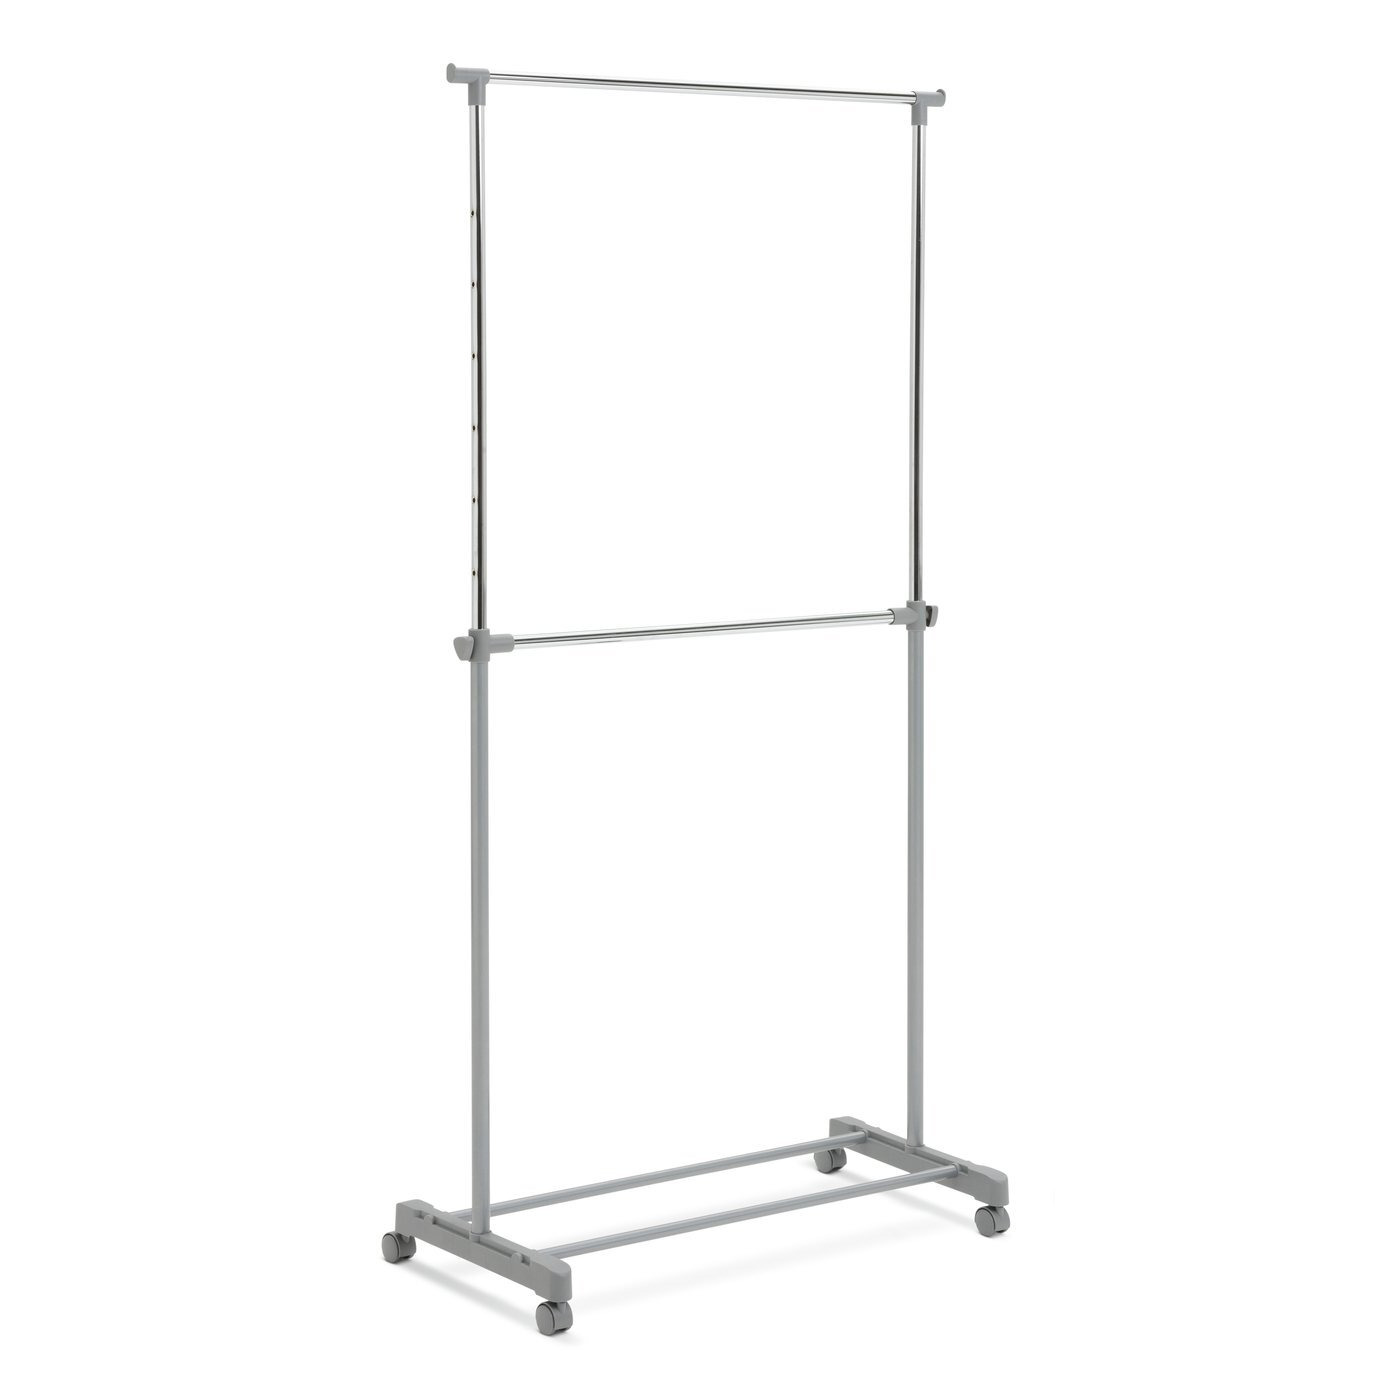 Argos Home Double Clothes Rail - Grey And Chrome - image 1